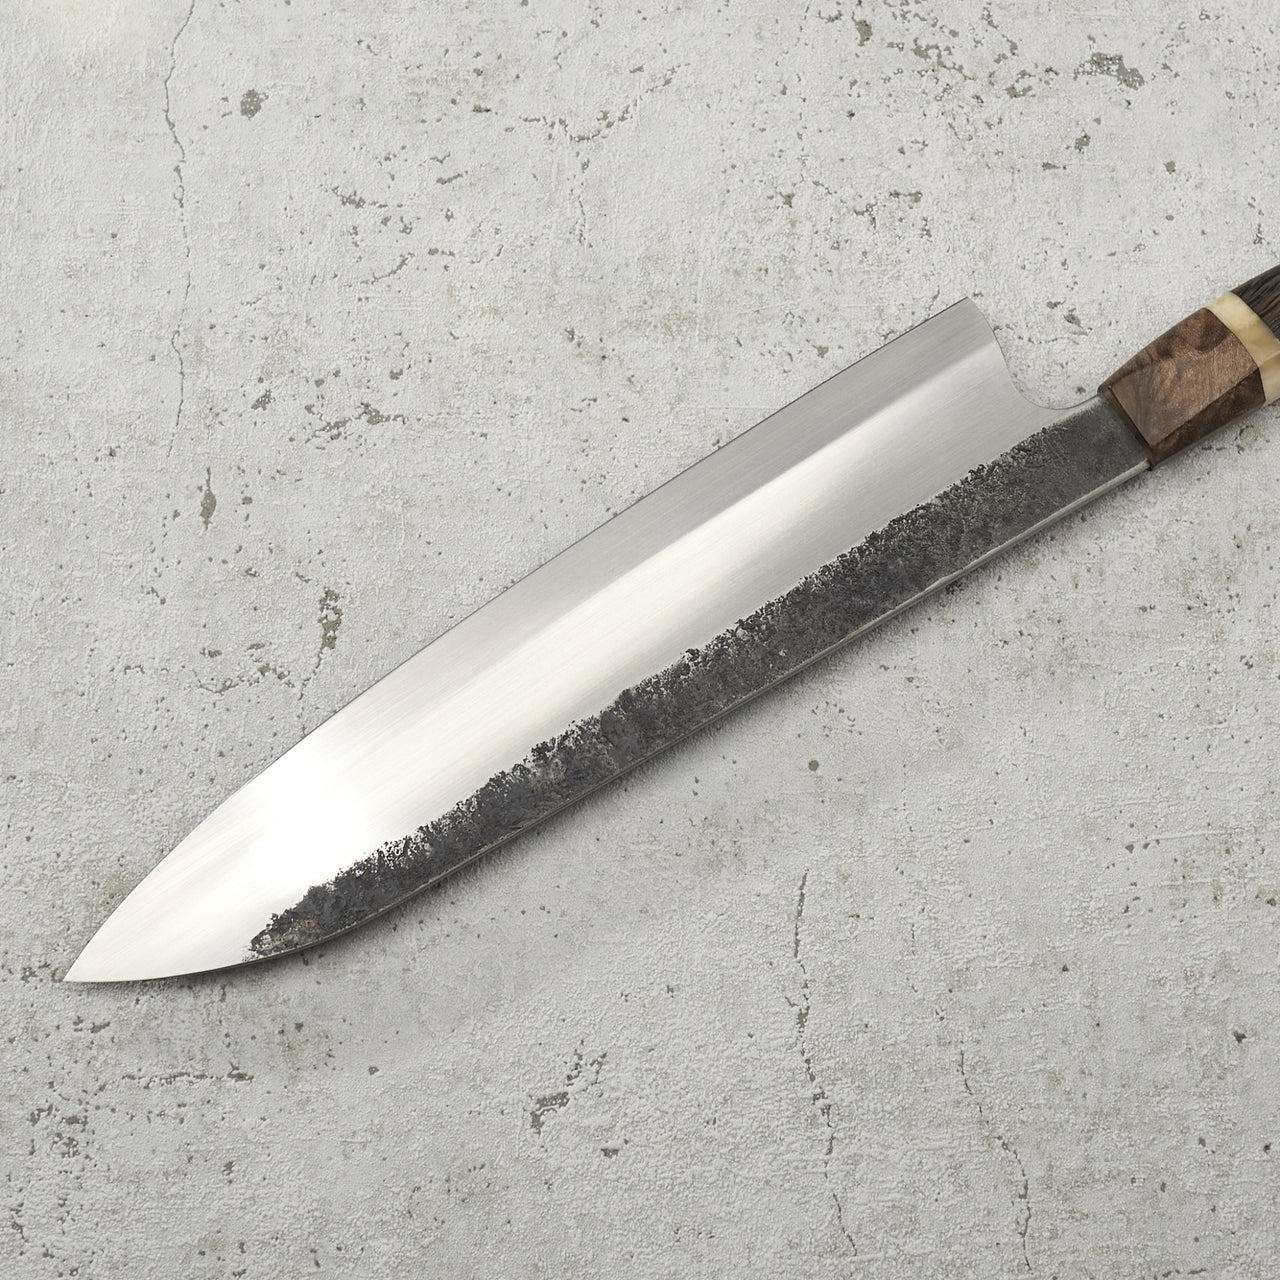 Lew Griffin Gyuto 240mm 52100 Carbon Steel - S Grind - Profile